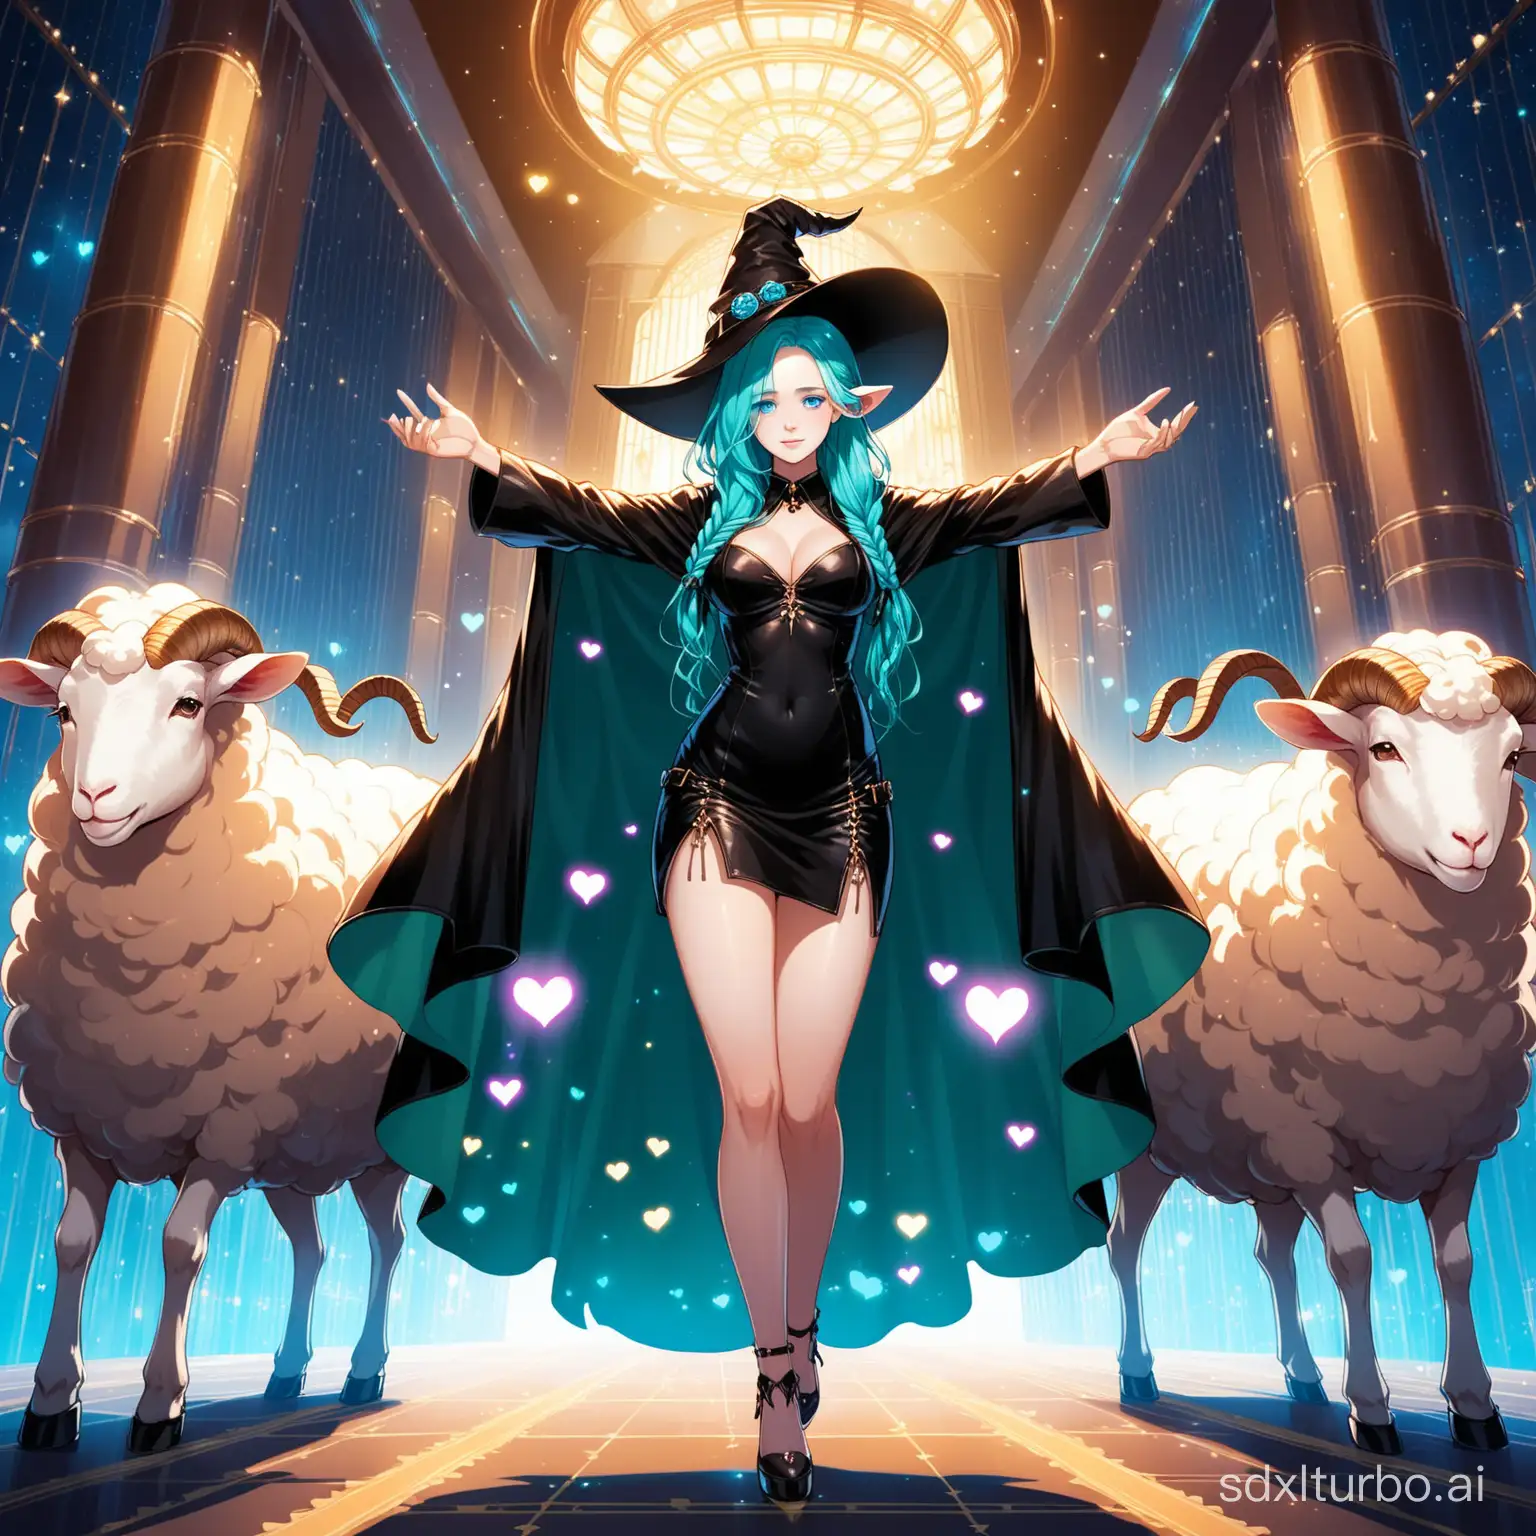 Elegant-Albino-Girl-with-Cyan-Hair-and-Unique-Accessories-Surrounded-by-Sheep-in-Luxury-Hotel